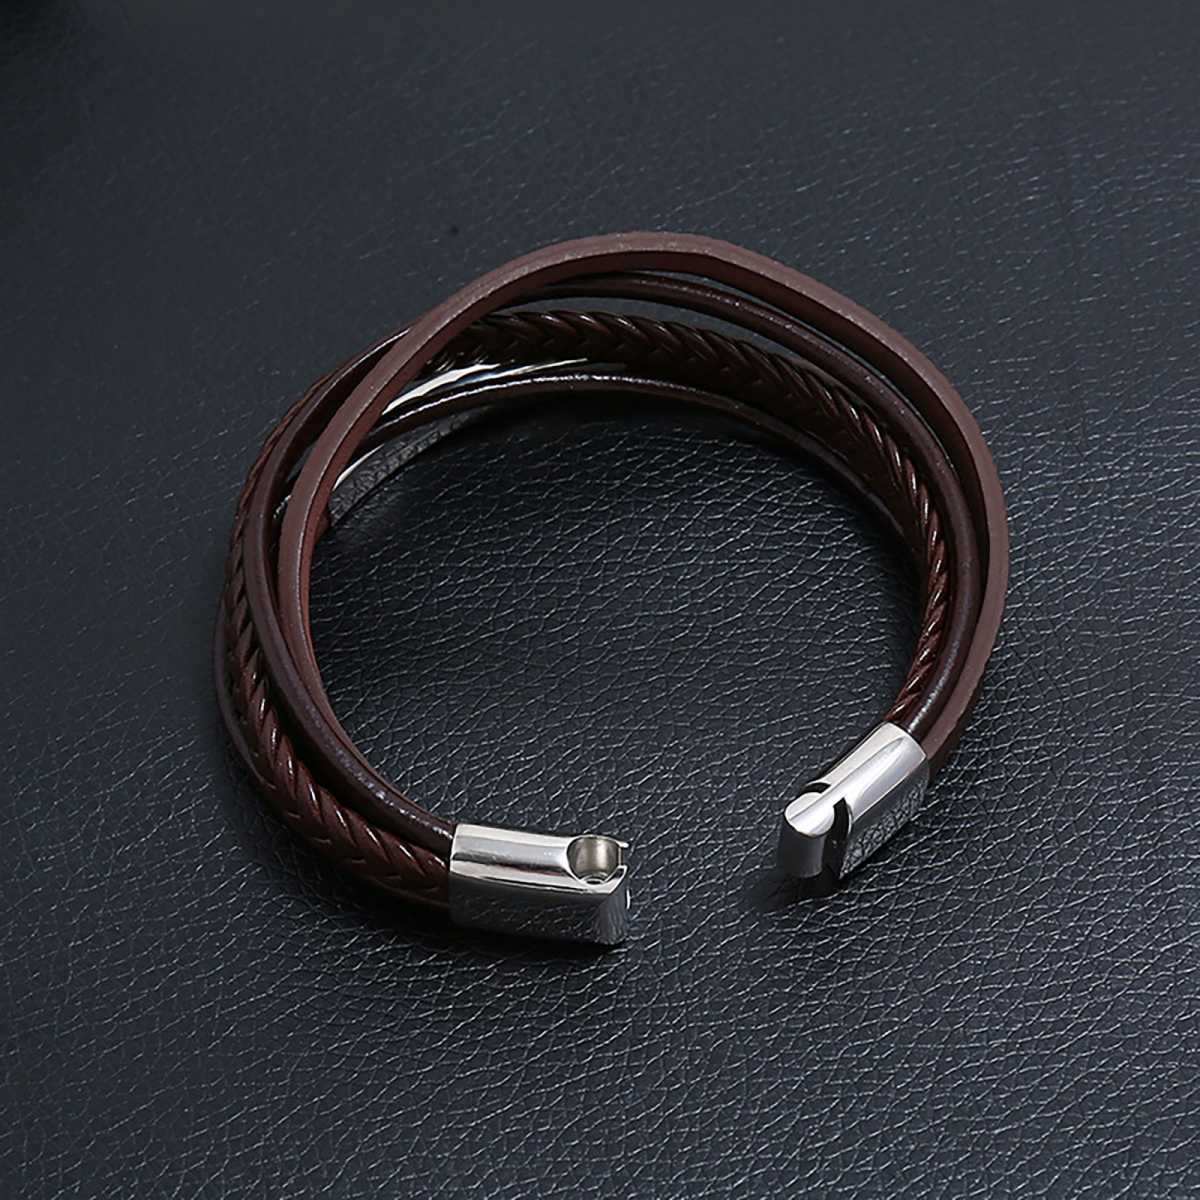 EngraveName Leather Bracelet- | Mali's Canadian Jewellery  Mali's  2  Metal Part: Stainless Steel  - Engravable Braided Leather 